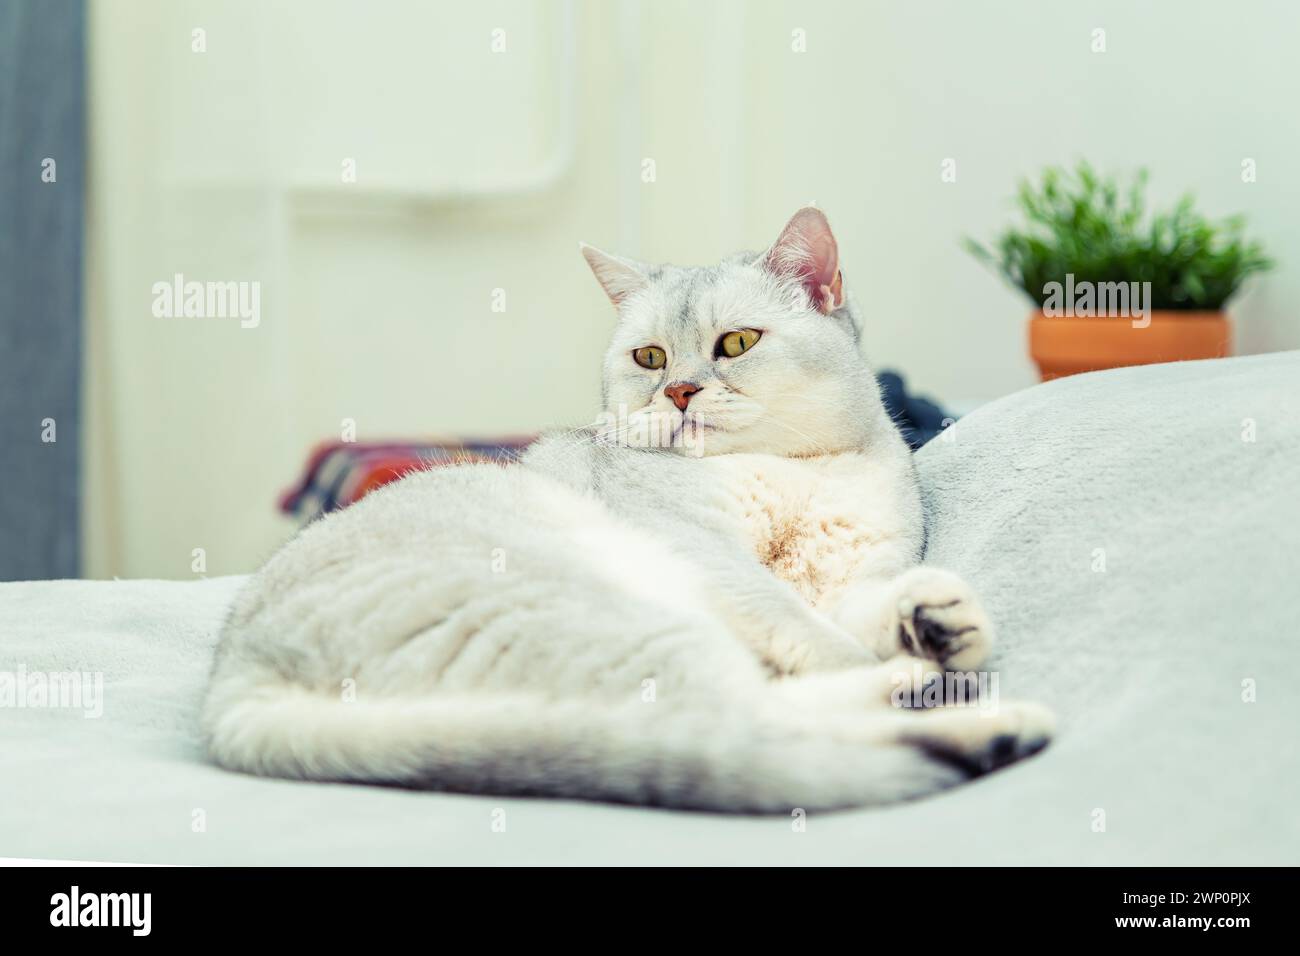 Cute Scottish Straight cat lies on the bed. Pet in a home interior. Stock Photo